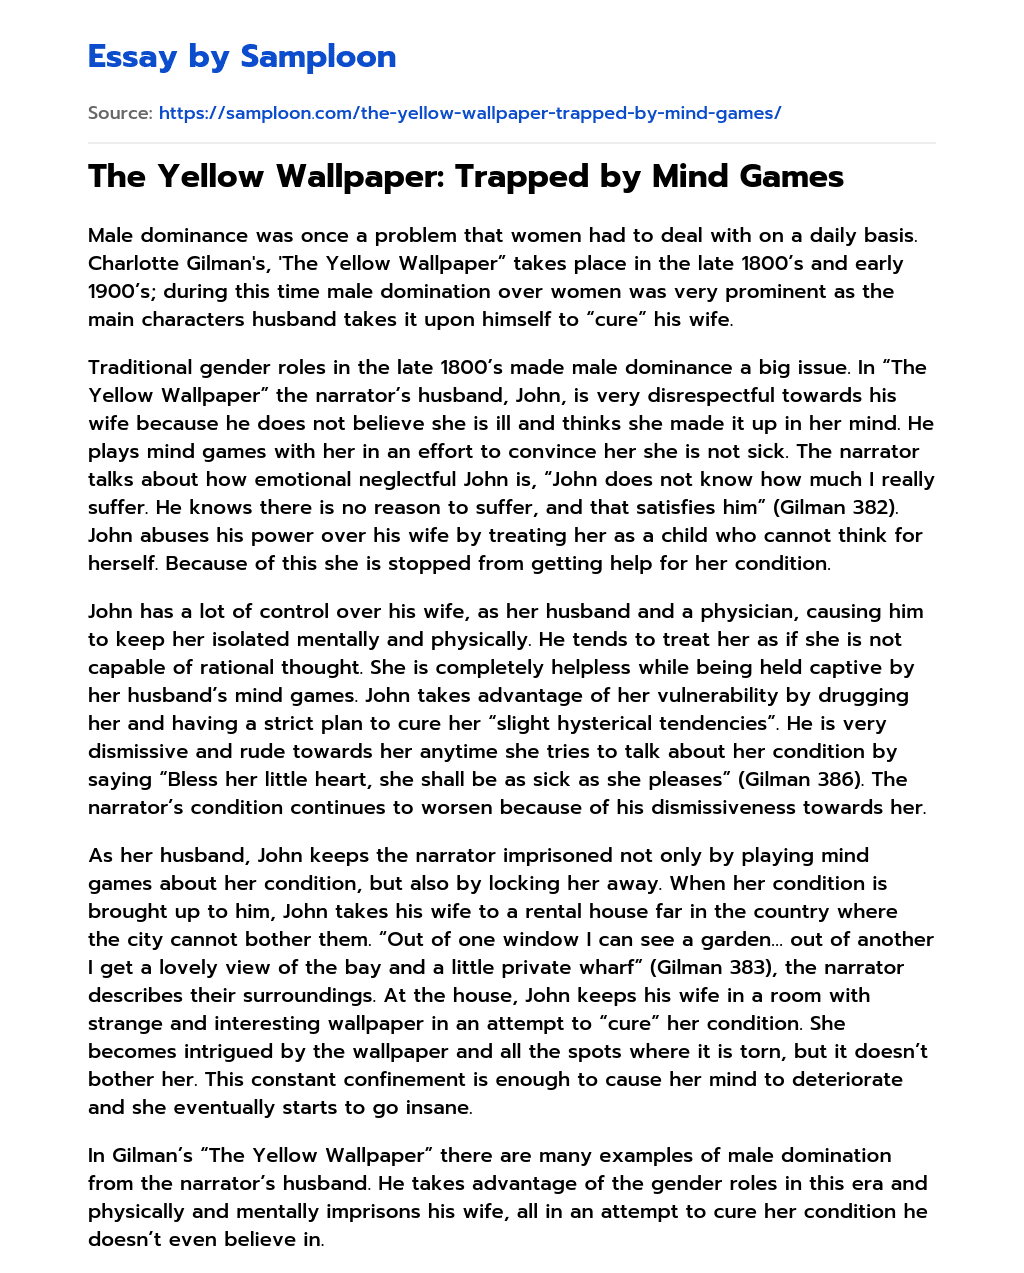 The Yellow Wallpaper: Trapped by Mind Games essay